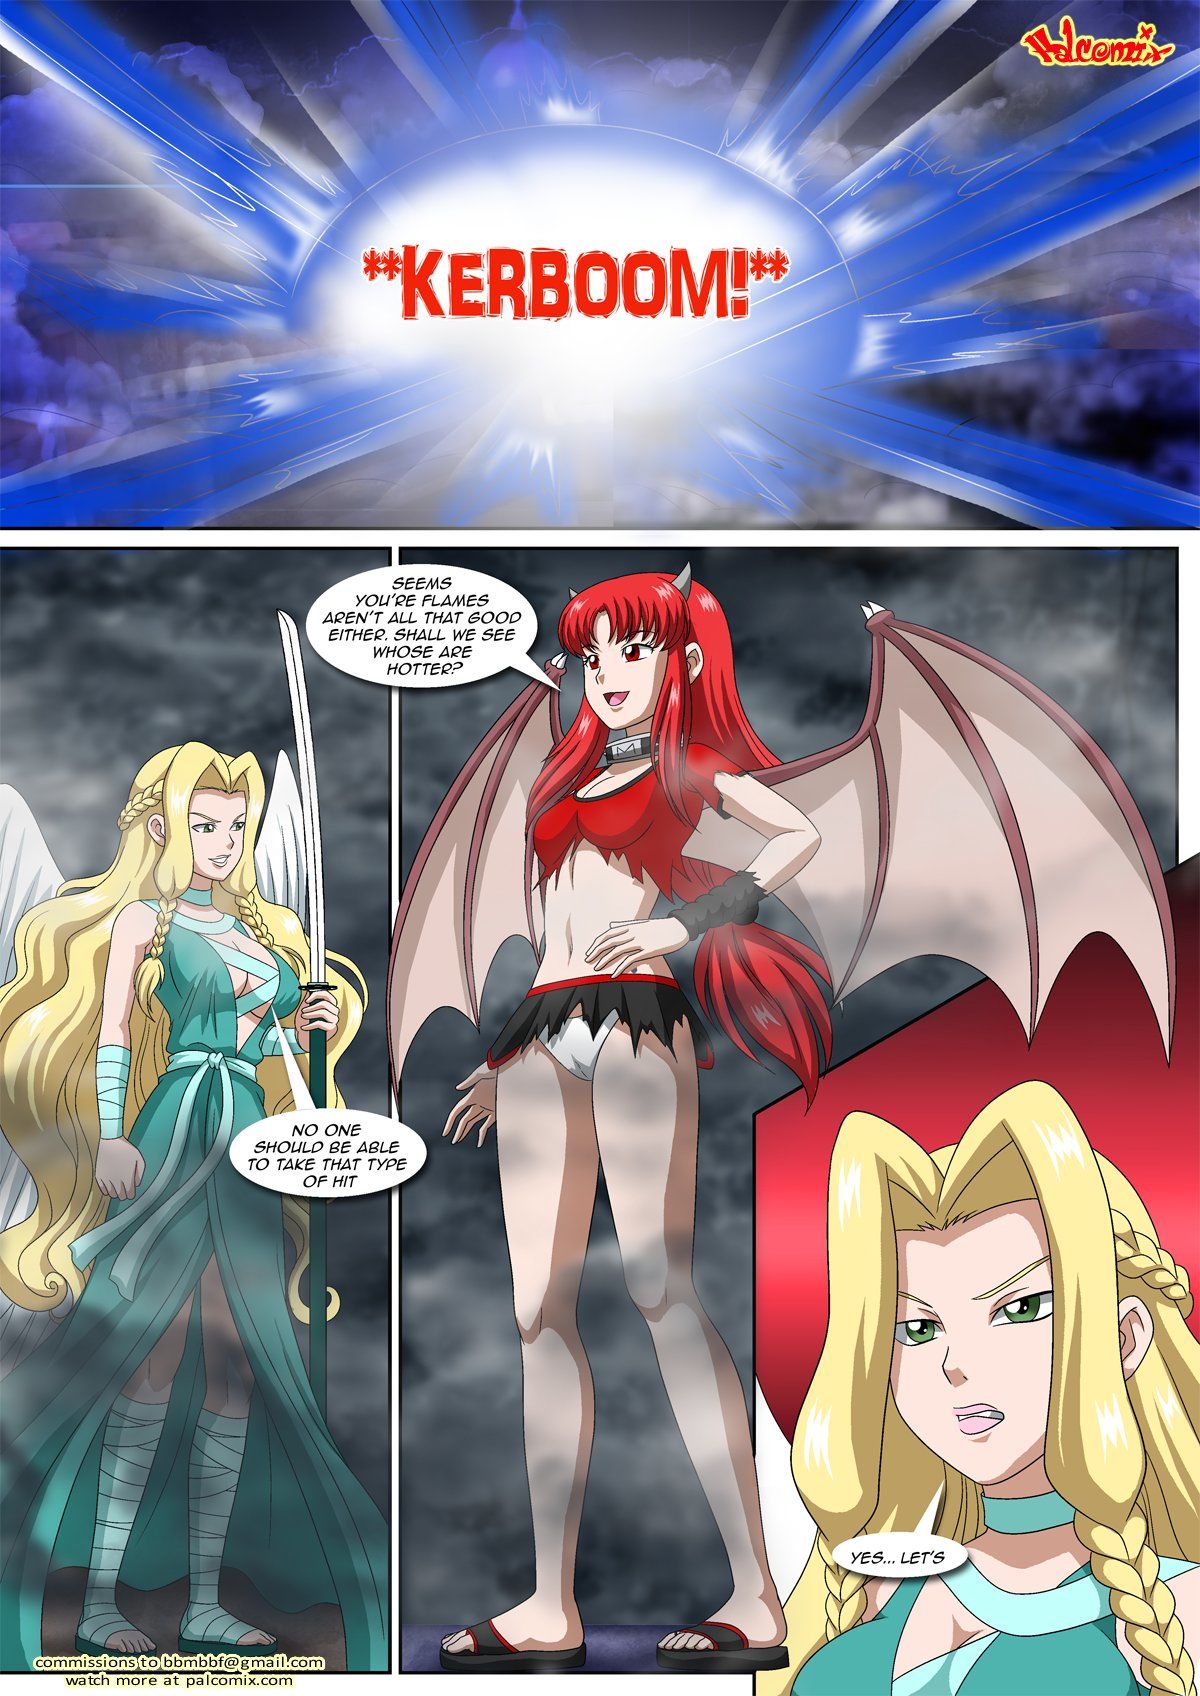 The Carnal Kingdom 6 - Angels and Demons page 72